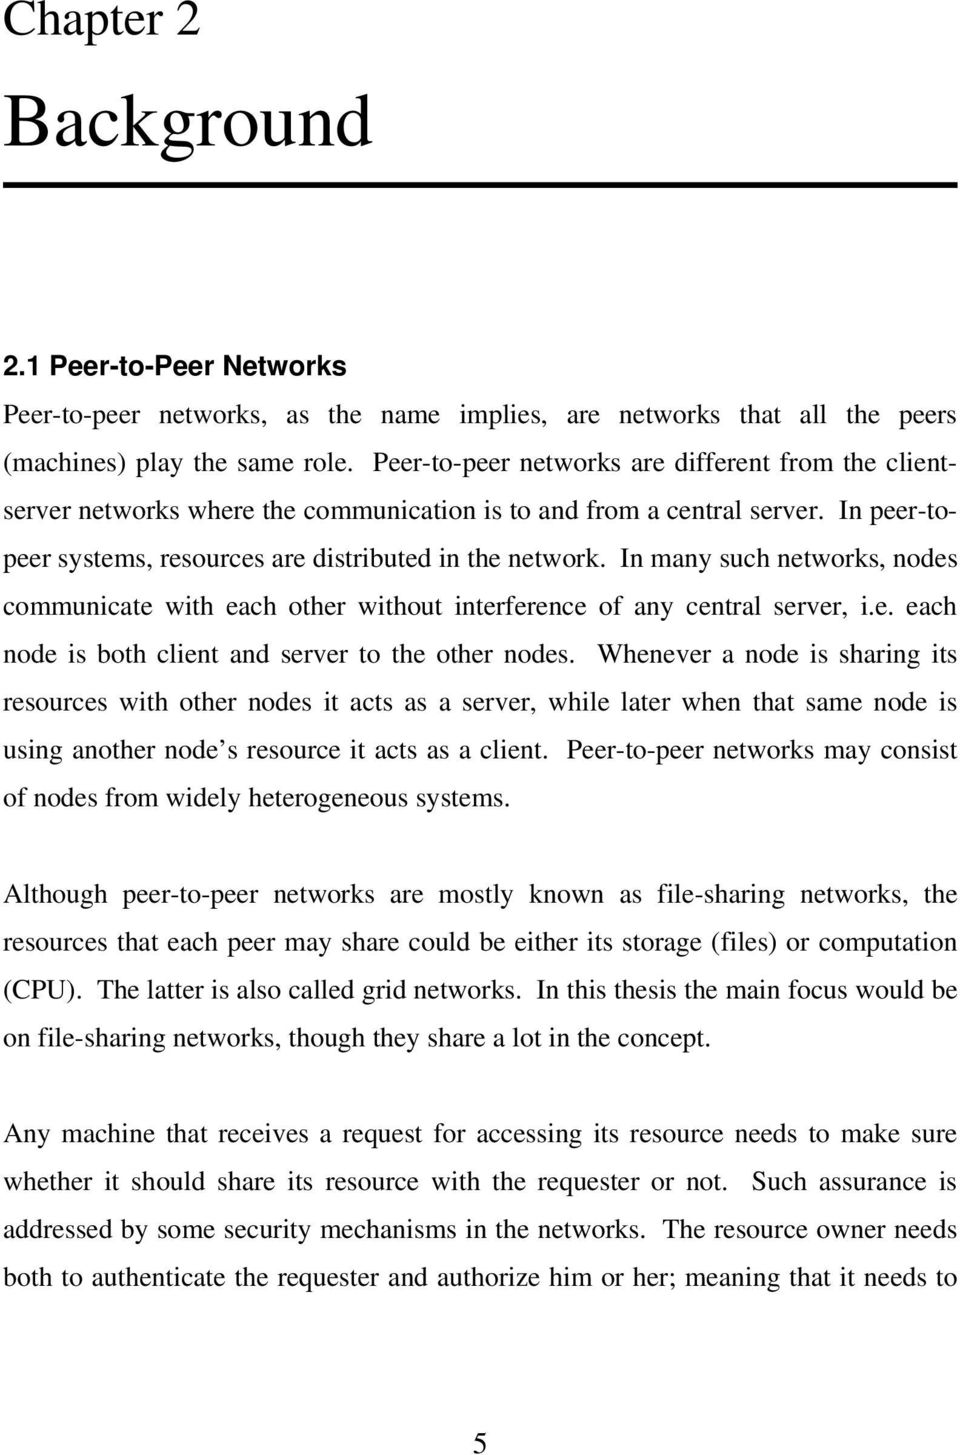 In many such networks, nodes communicate with each other without interference of any central server, i.e. each node is both client and server to the other nodes.